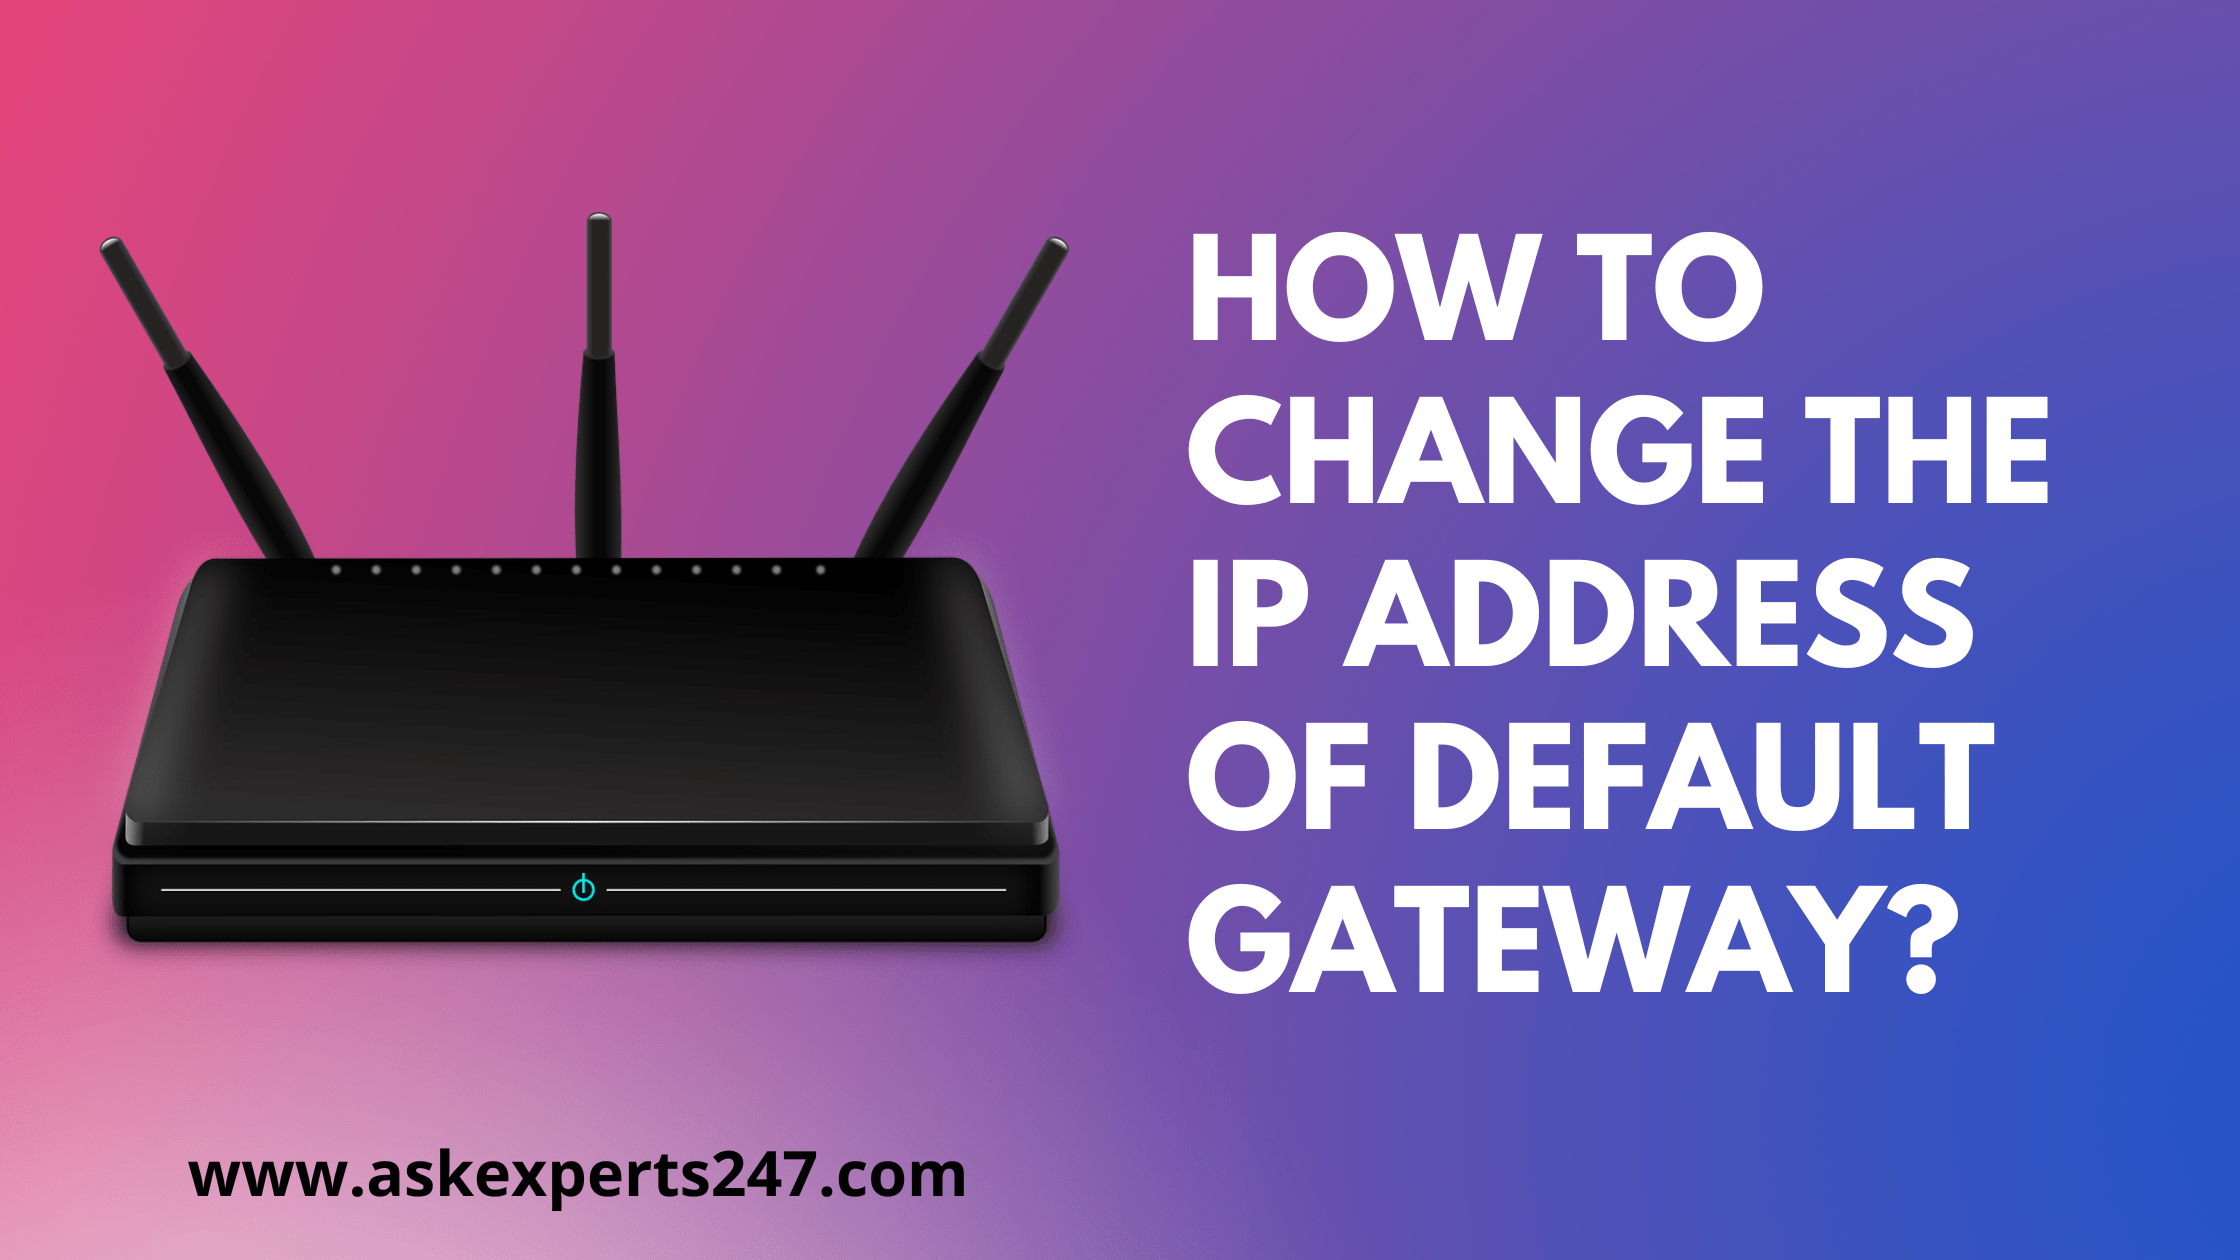 How to change the IP address of the default gateway